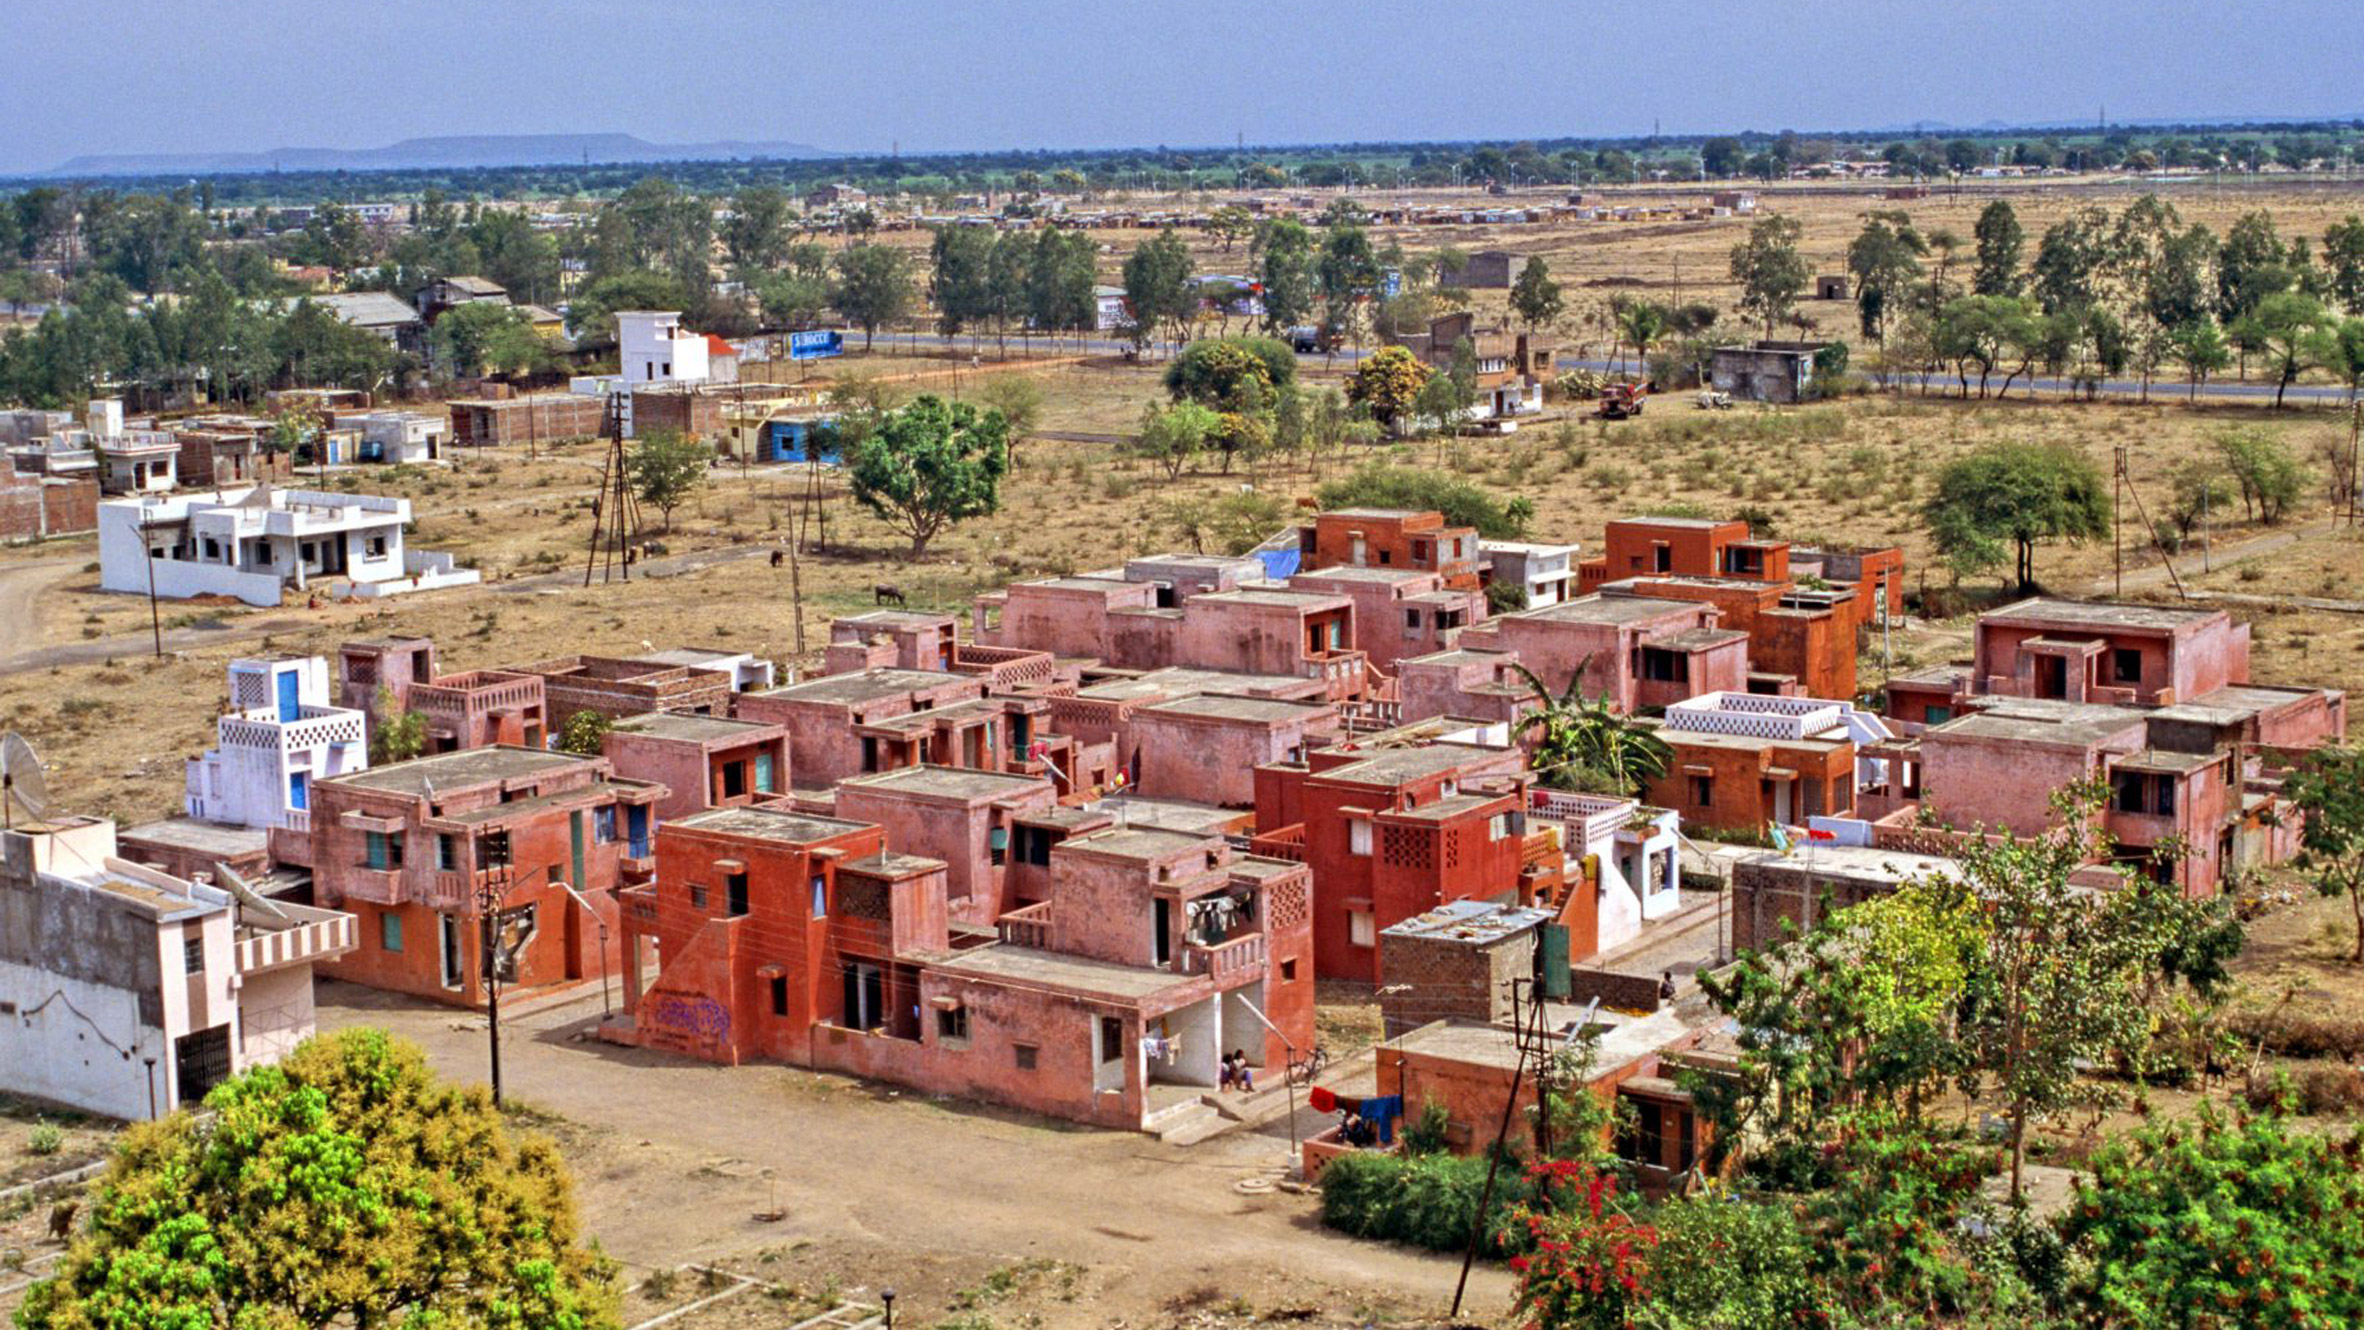 Indore low-cost housing by Balkrishna Doshi